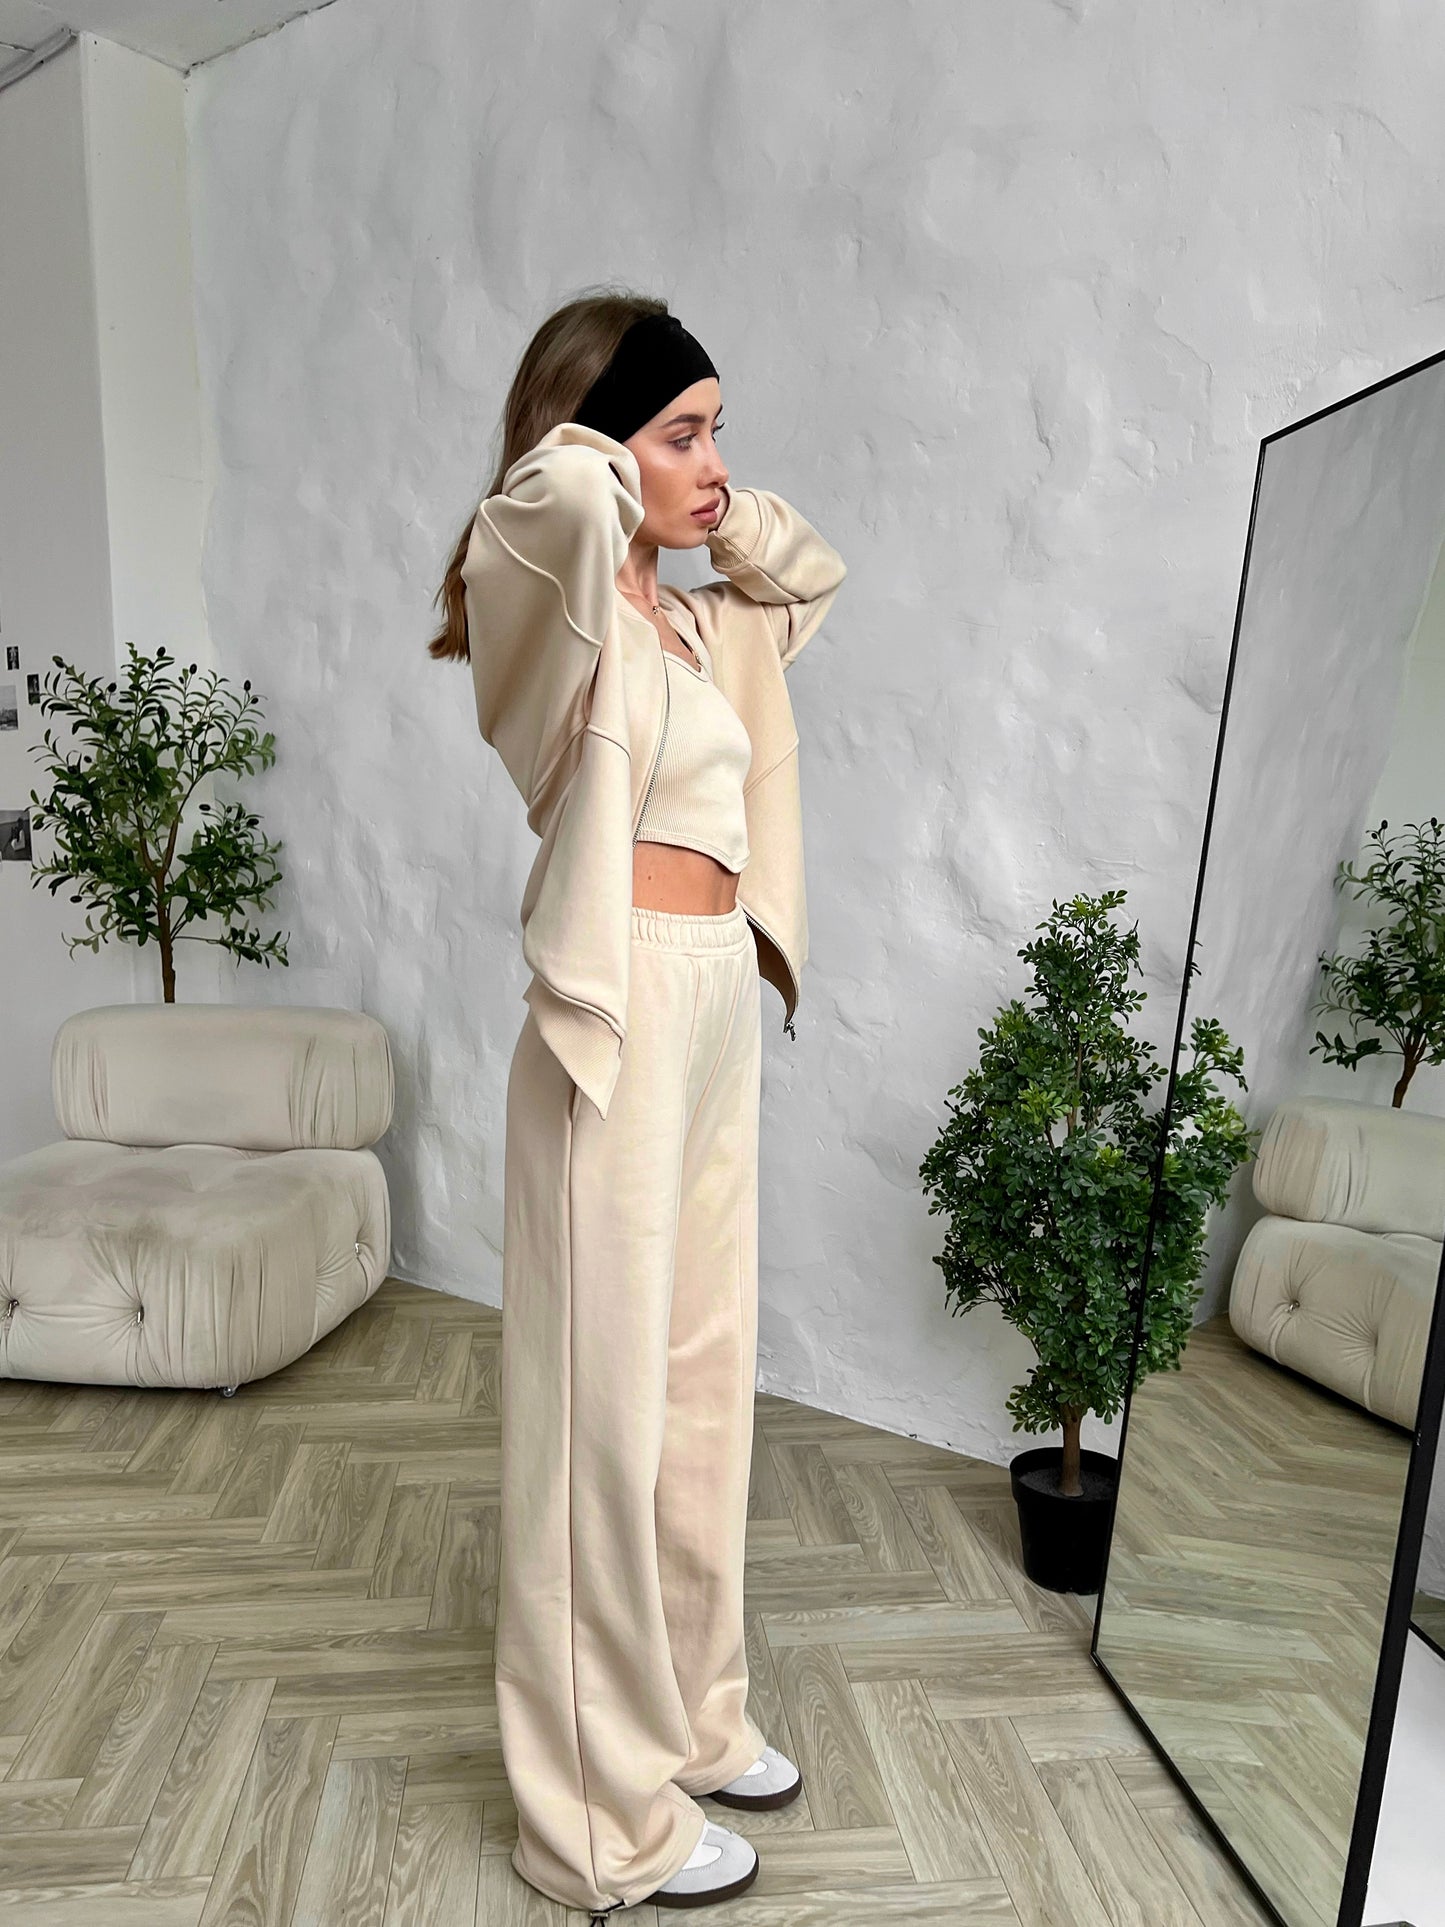 Women's suit RELAX Creme brulee